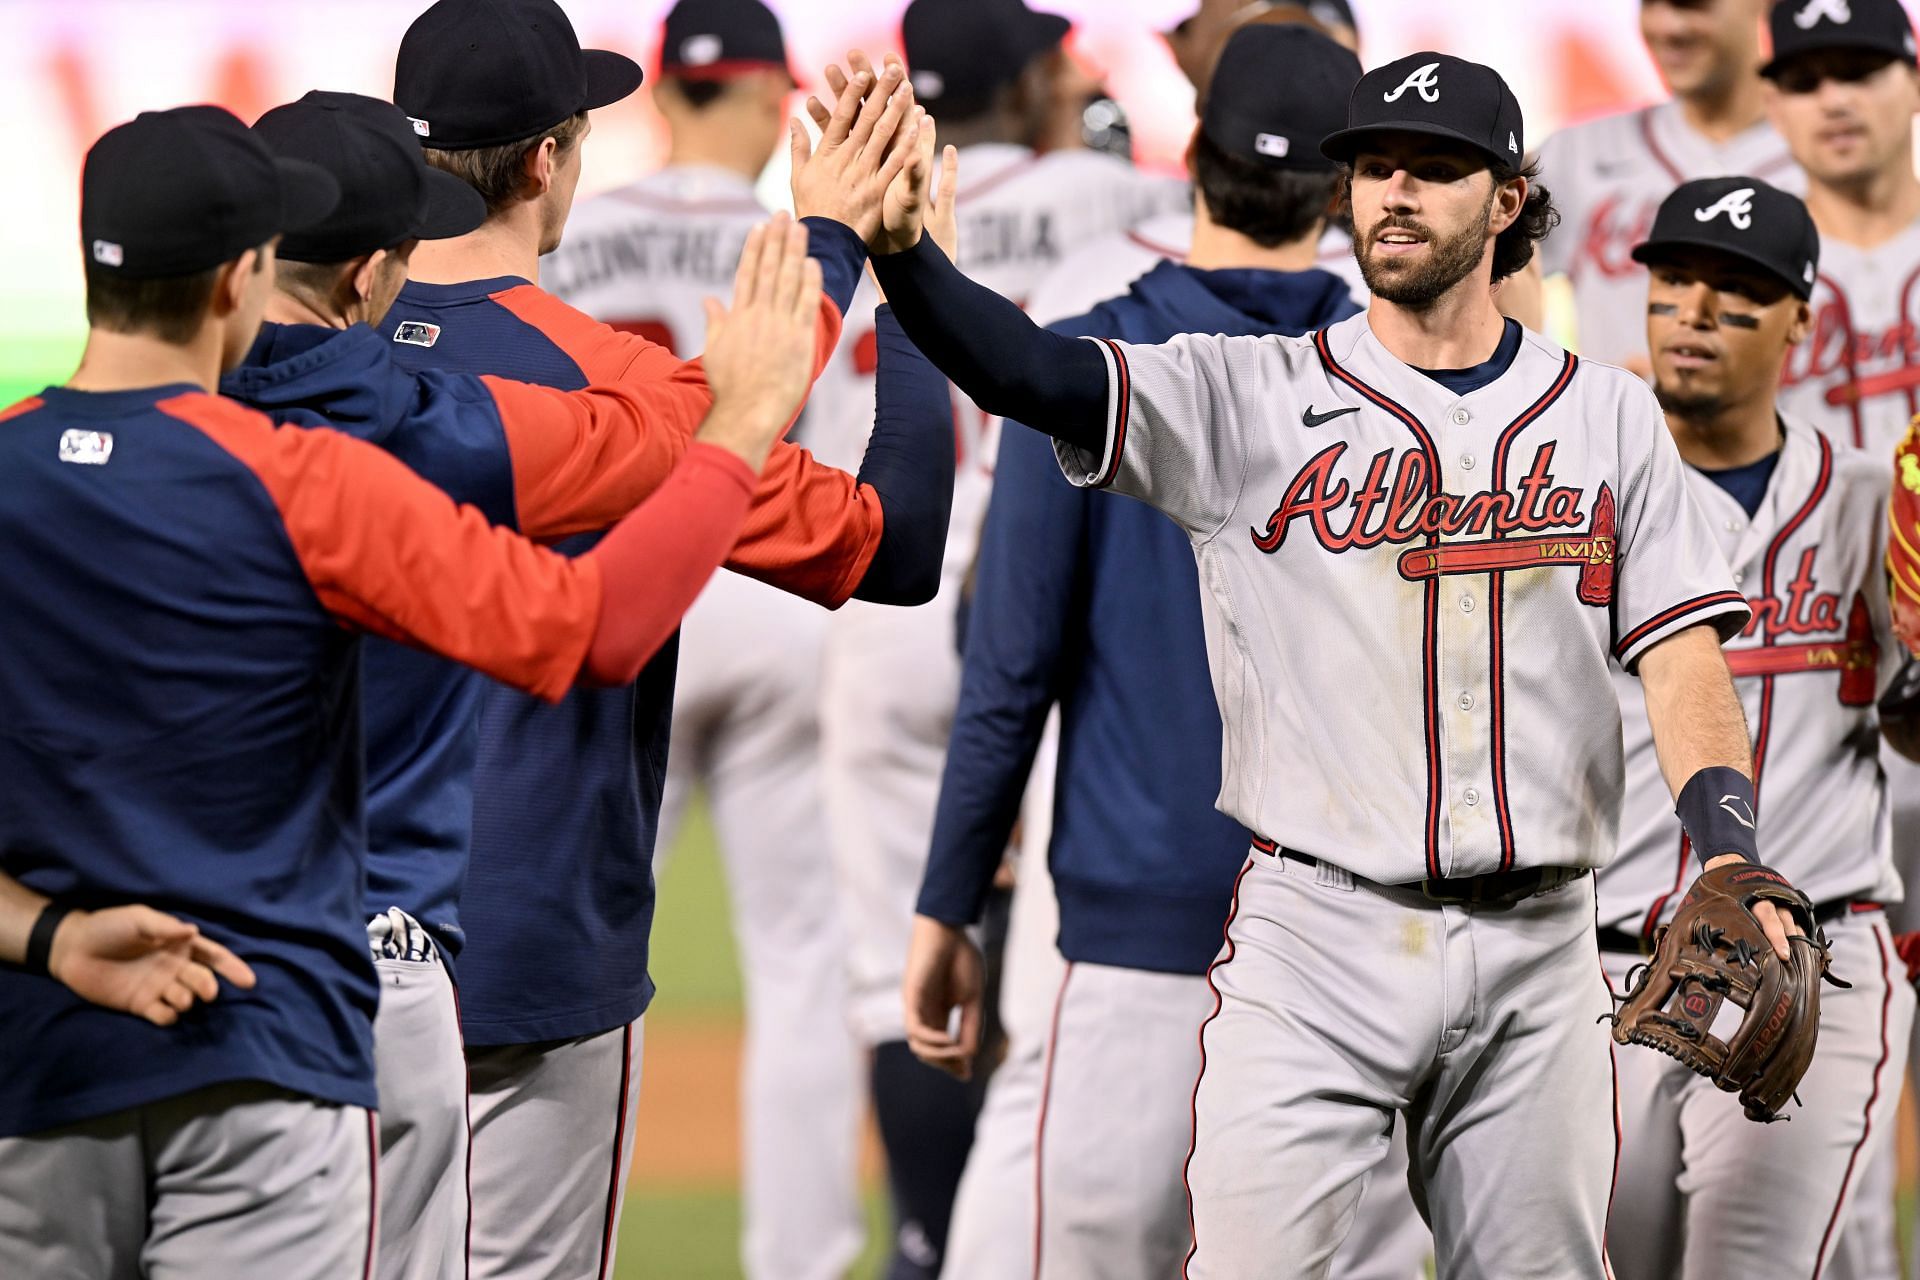 The Atlanta Braves celebrate a victory over the Washington Nationals.